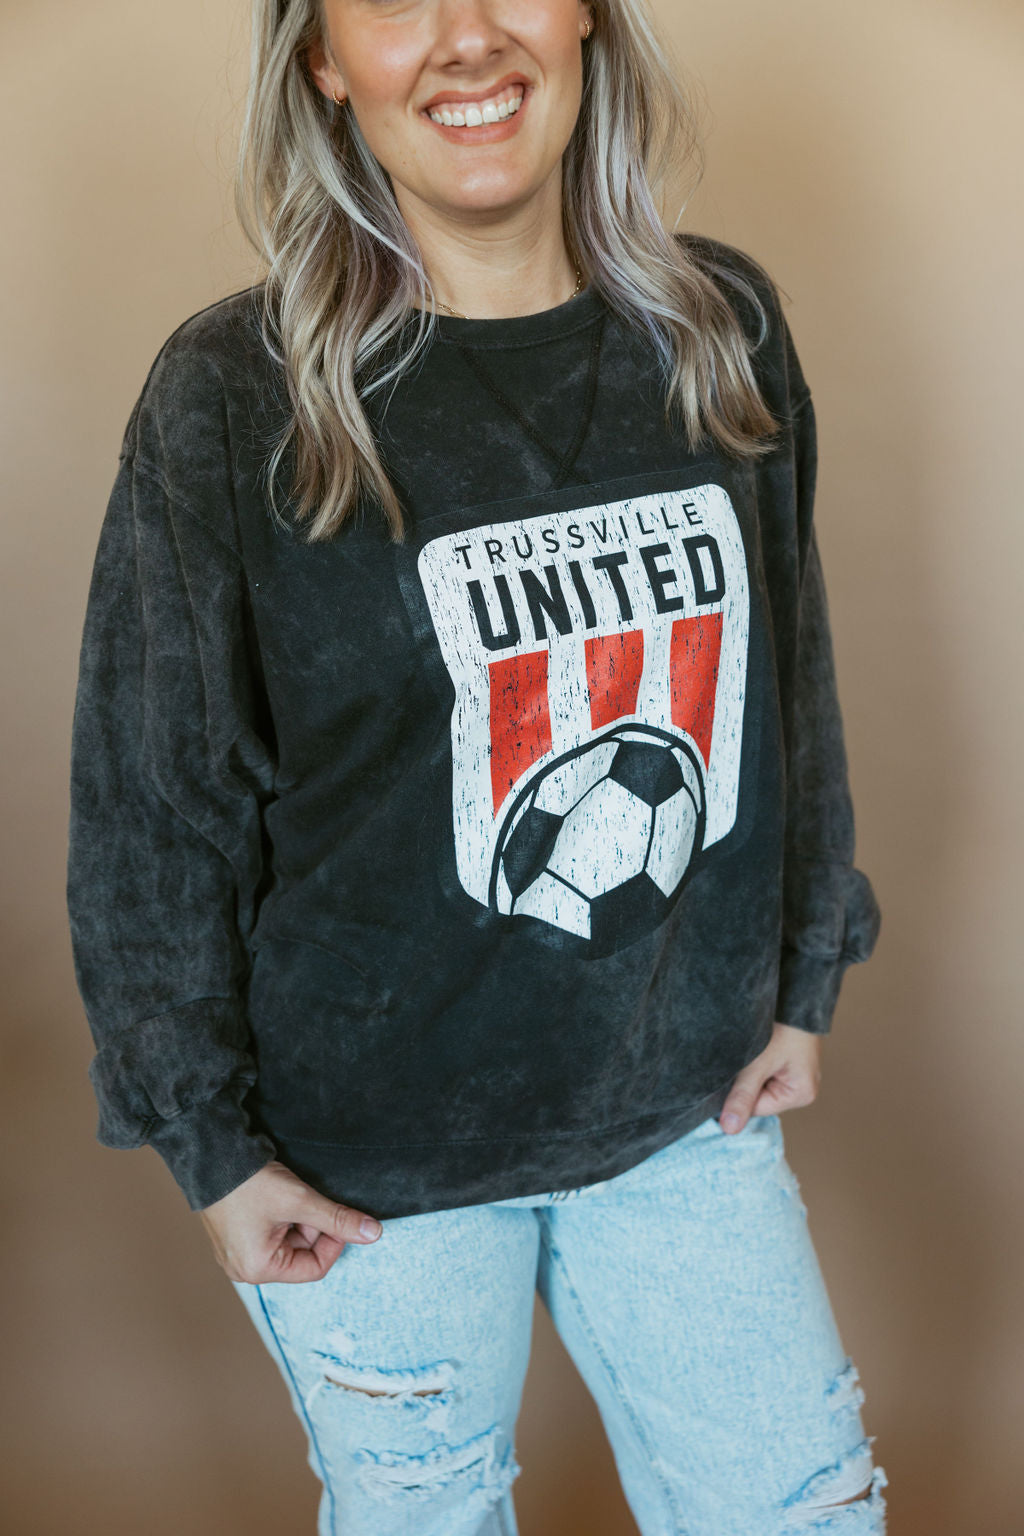 Trussville United Distressed | Adult Mineral Wash Pullover-Adult Crewneck-Sister Shirts-Sister Shirts, Cute & Custom Tees for Mama & Littles in Trussville, Alabama.